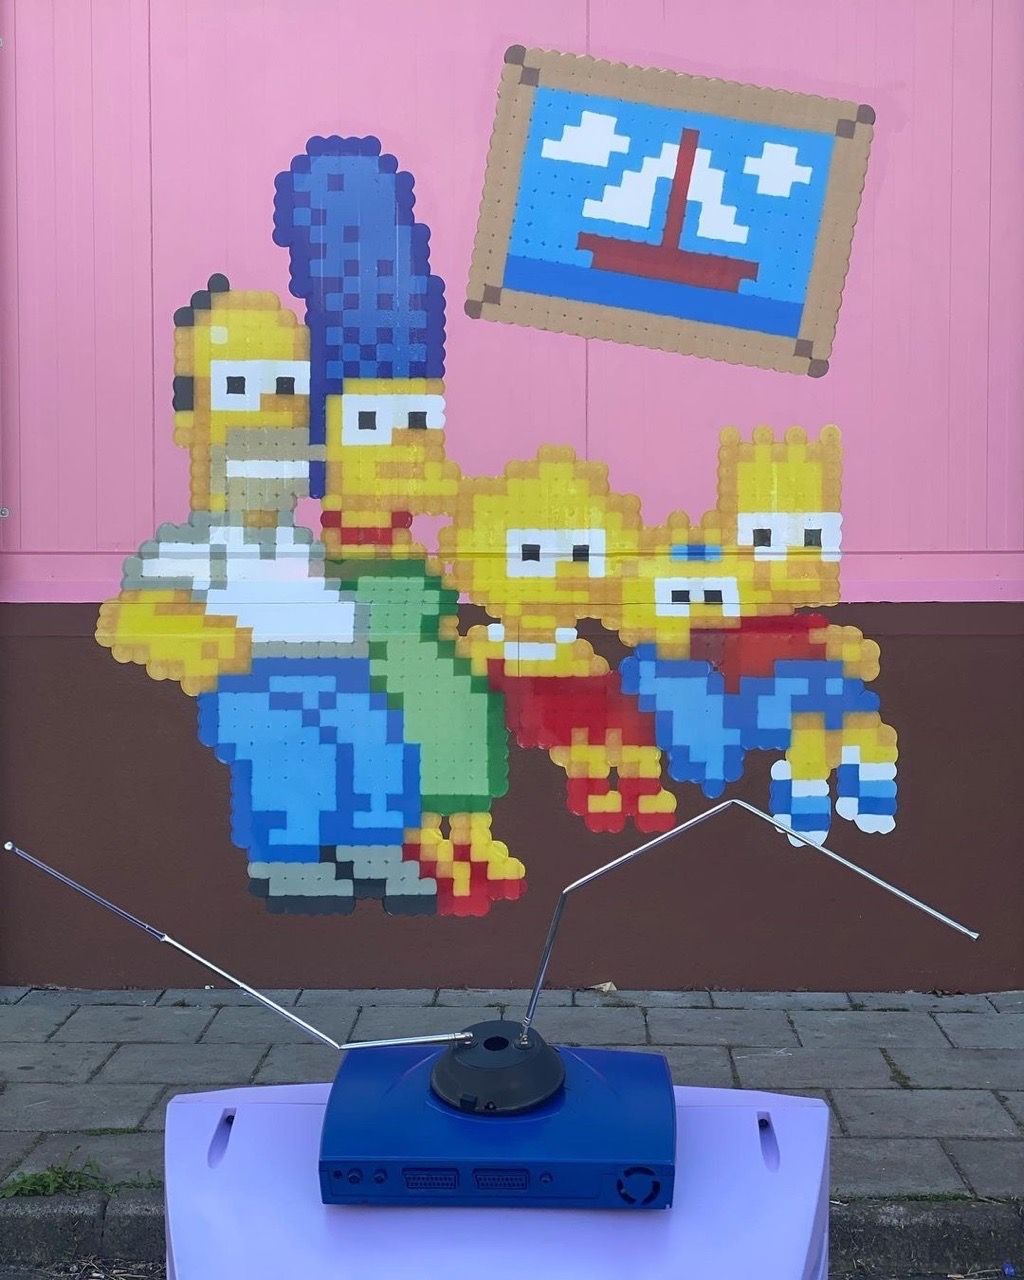 “The Simpsons couch”